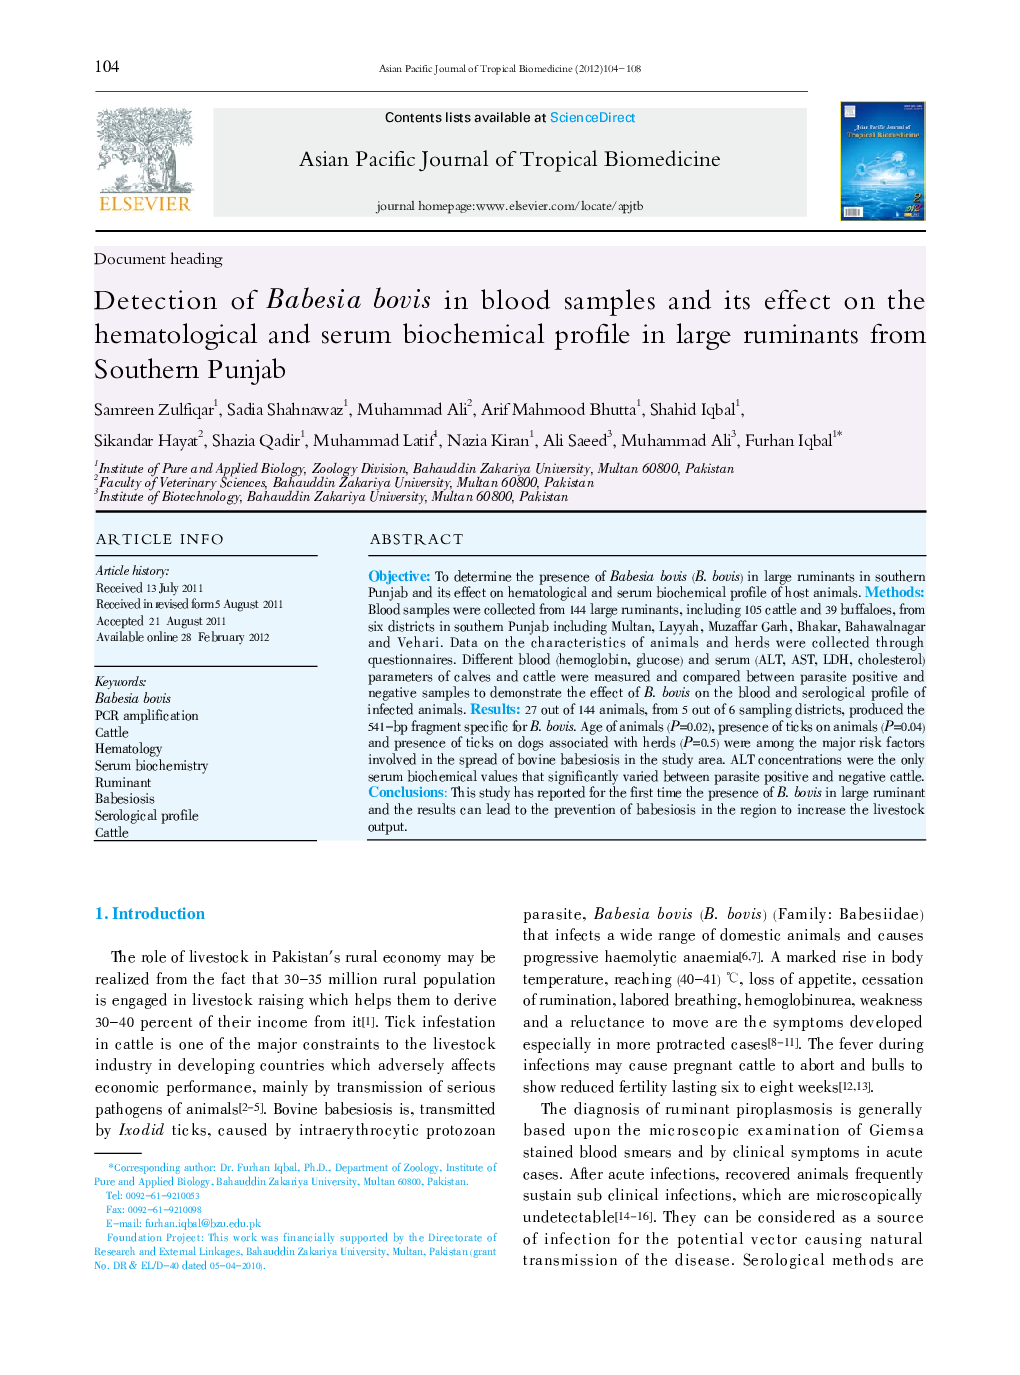 Detection of Babesia bovis in blood samples and its effect on the hematological and serum biochemical profile in large ruminants from Southern Punjab